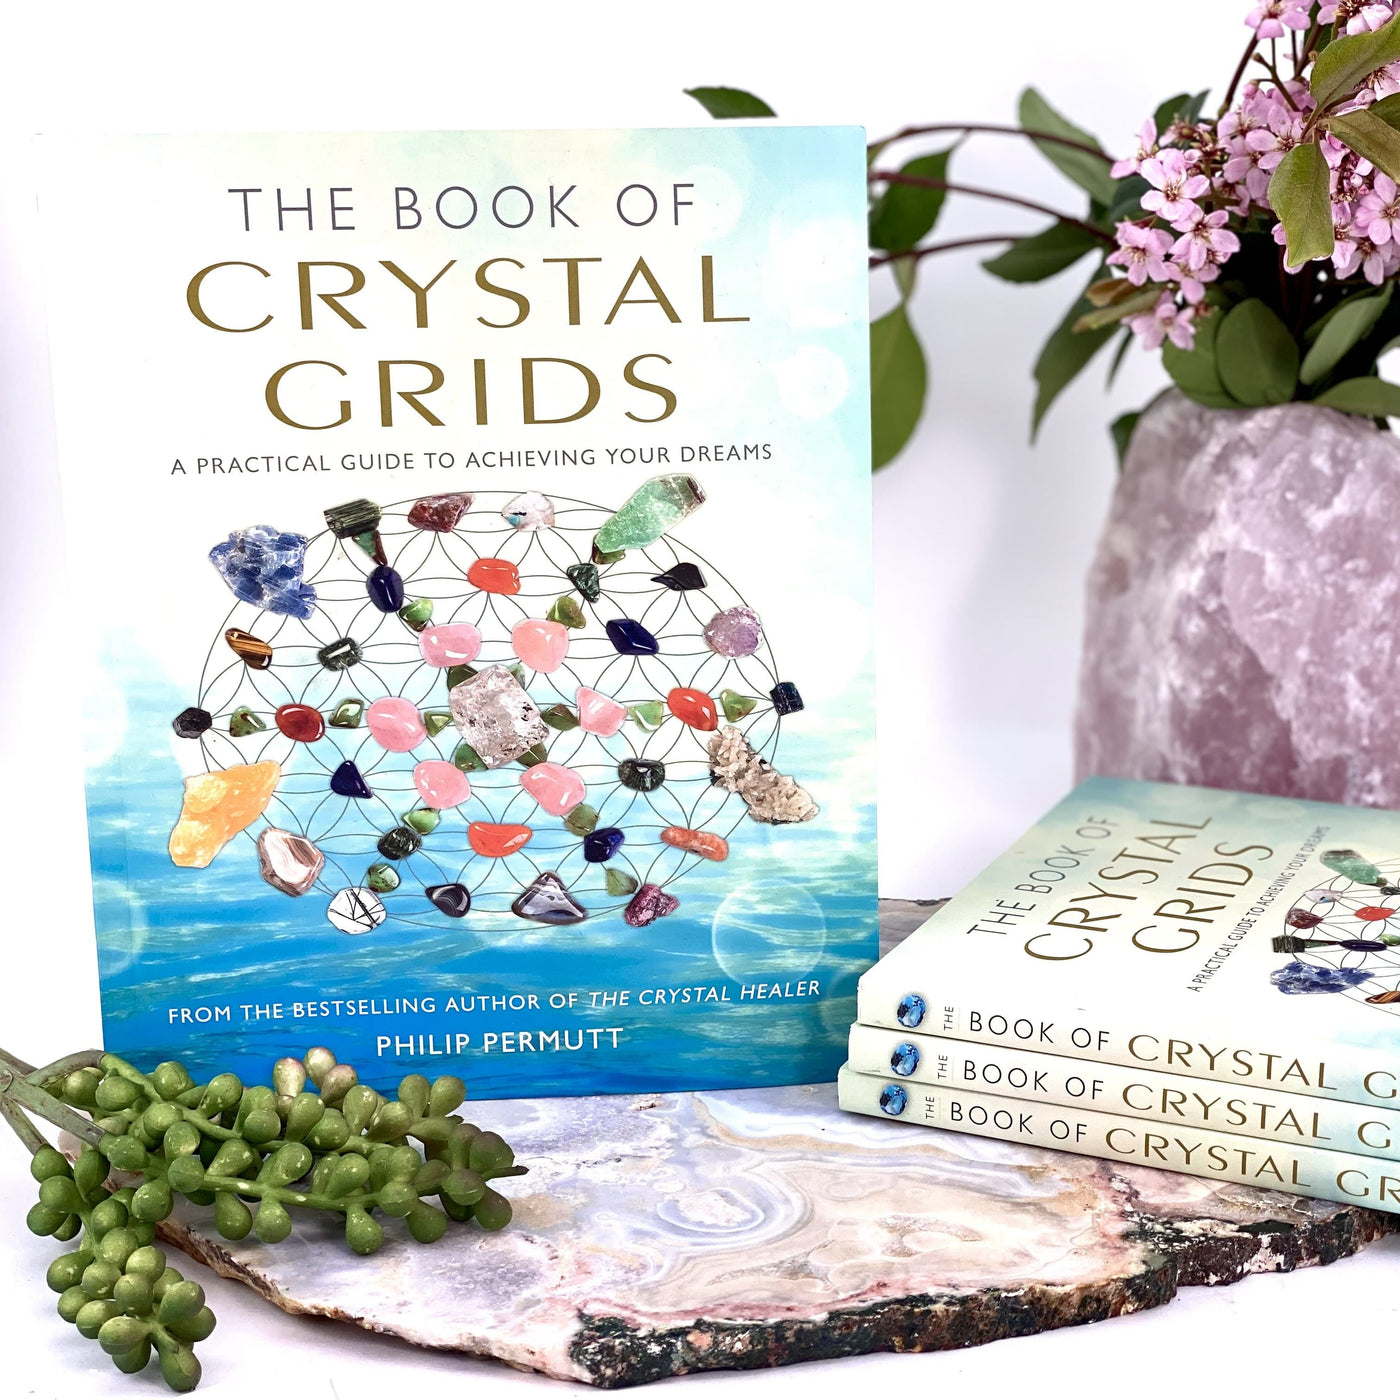 The Book of Crystal Grids ,A Practical Guide to Achieving Your Dreams By Philip Permutt